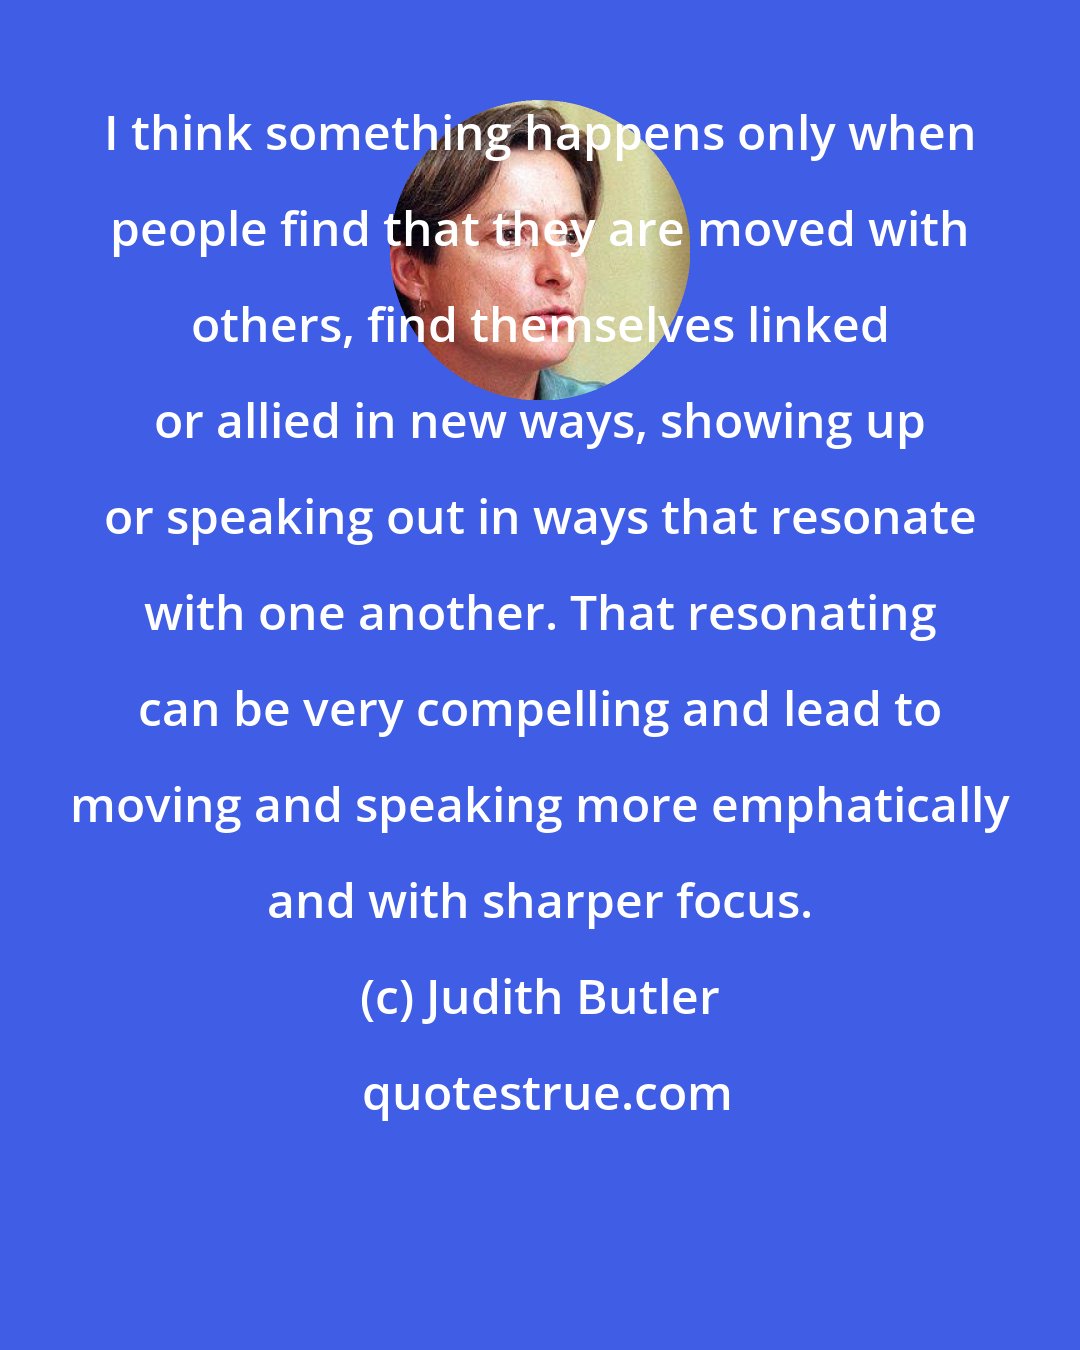 Judith Butler: I think something happens only when people find that they are moved with others, find themselves linked or allied in new ways, showing up or speaking out in ways that resonate with one another. That resonating can be very compelling and lead to moving and speaking more emphatically and with sharper focus.